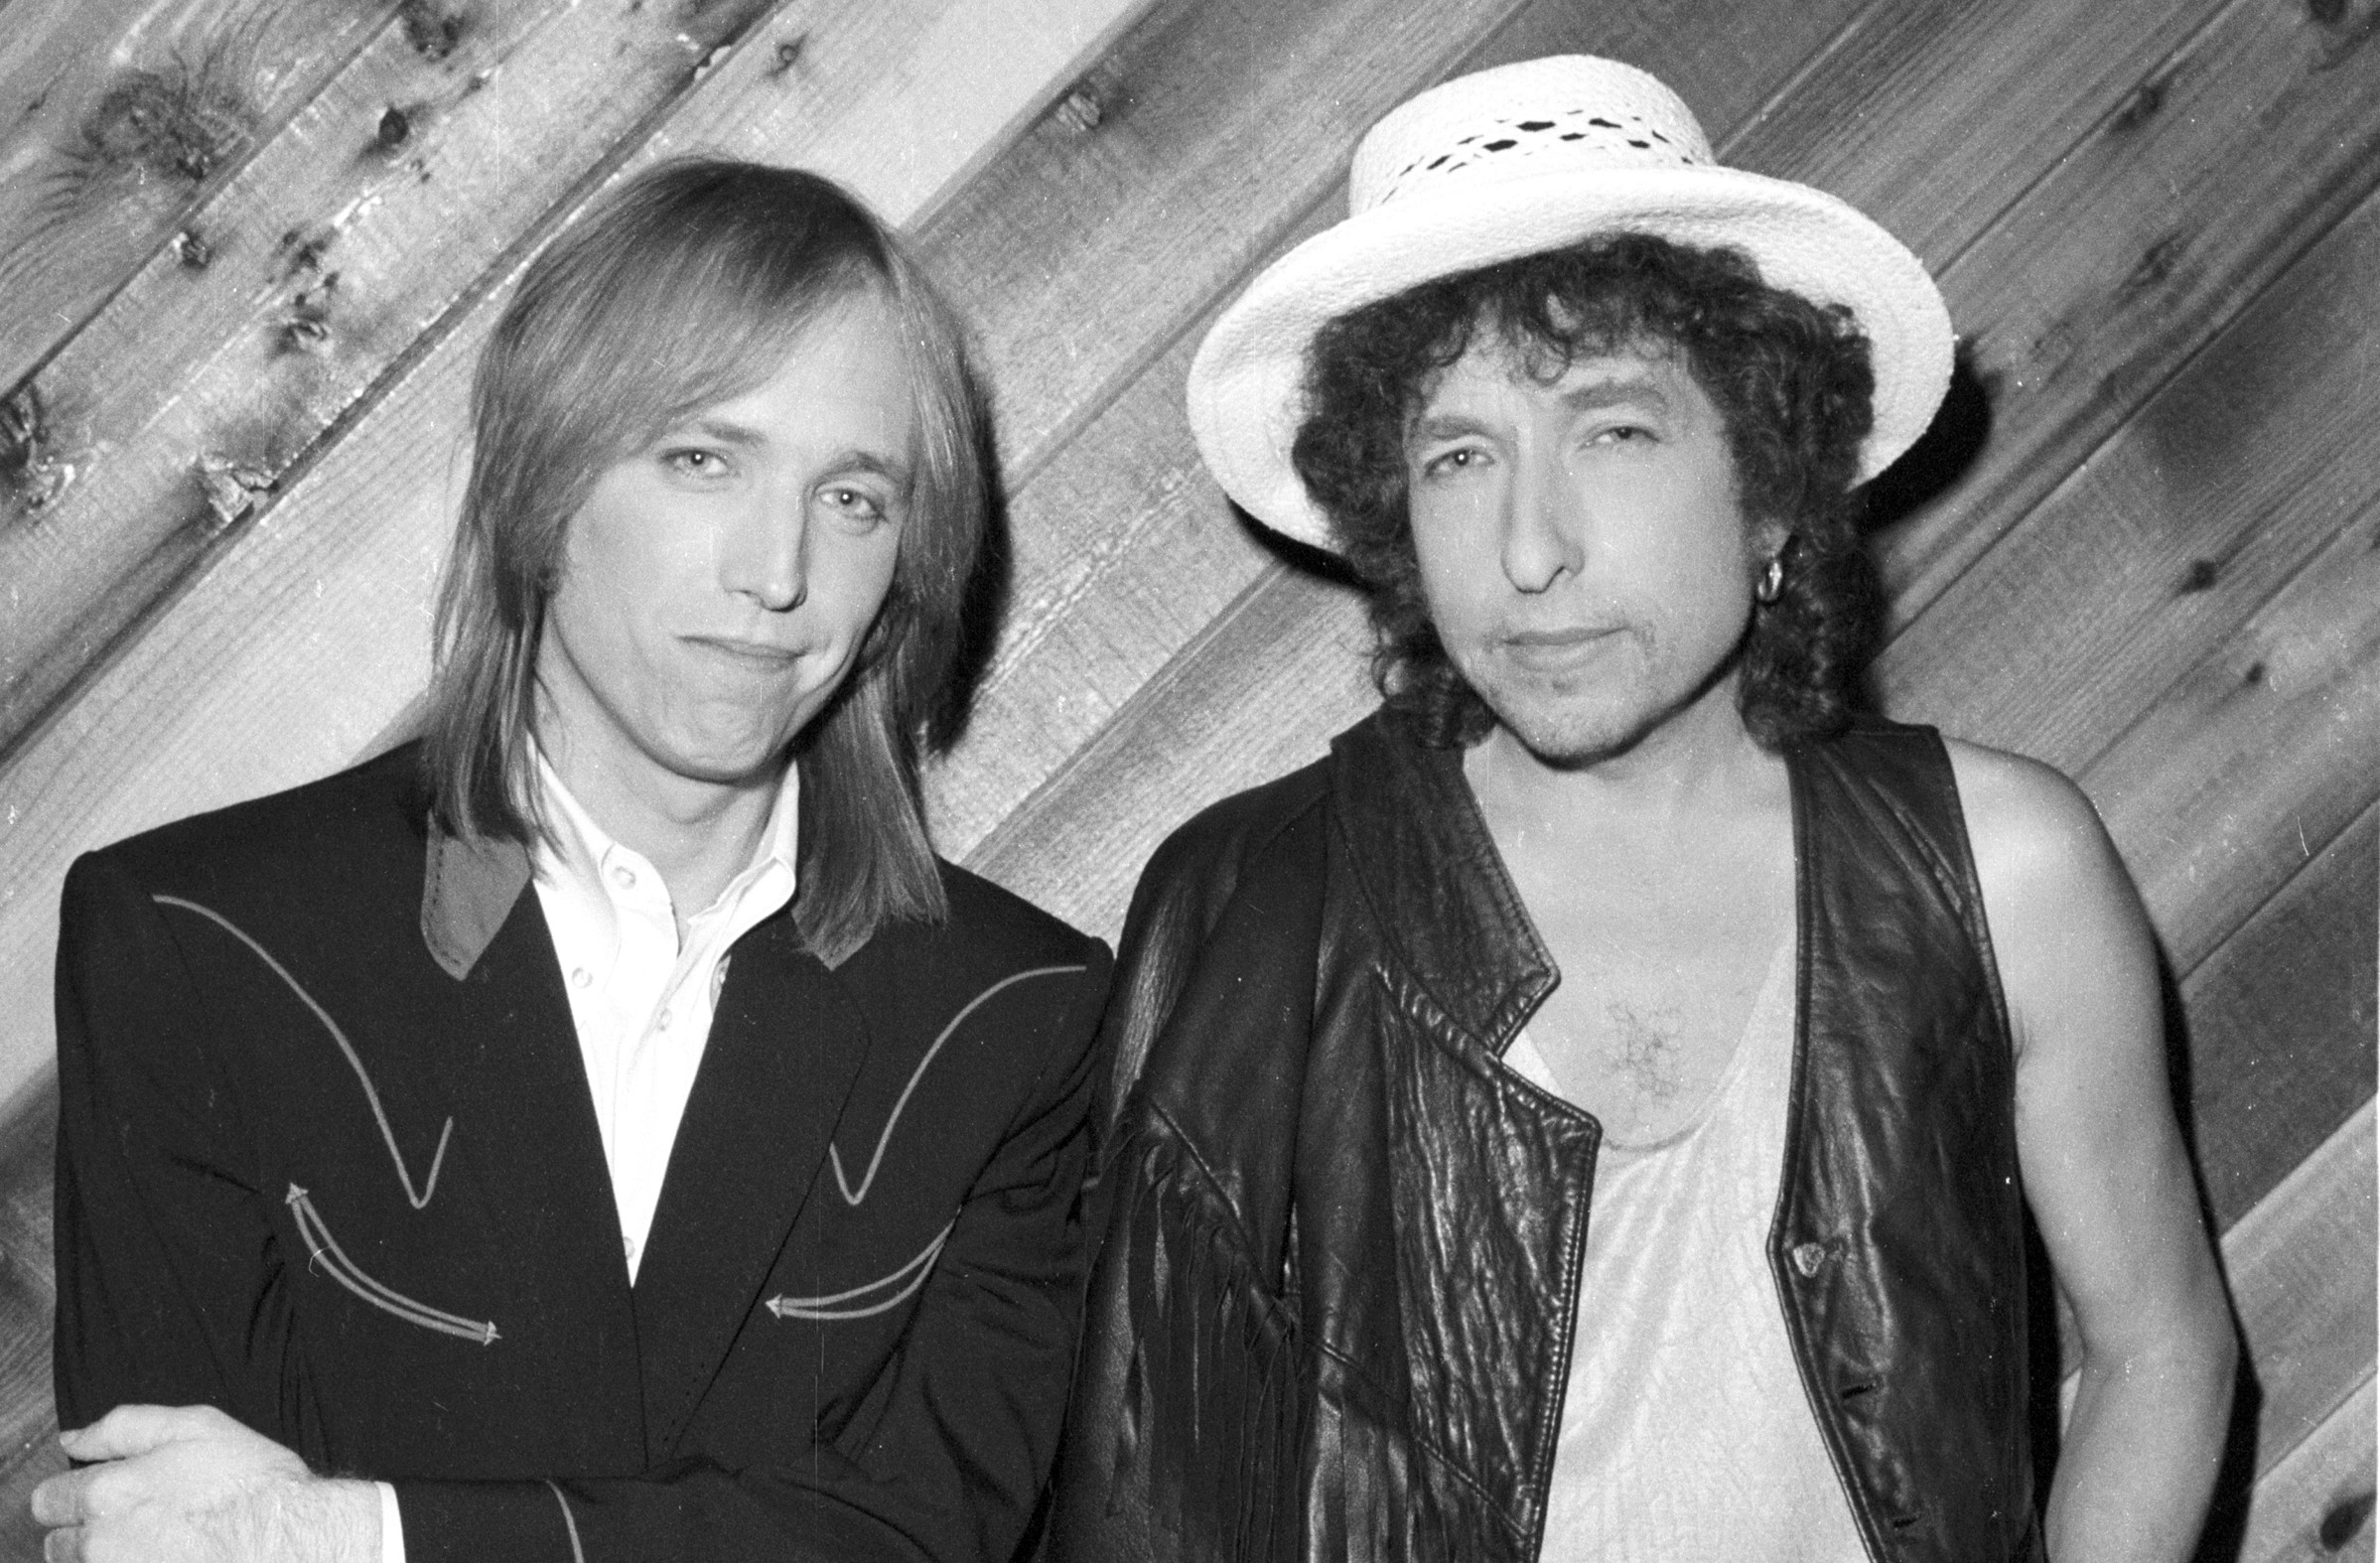 A black and white photo of Tom Petty and Bob Dylan leaning against a wood paneled wall.